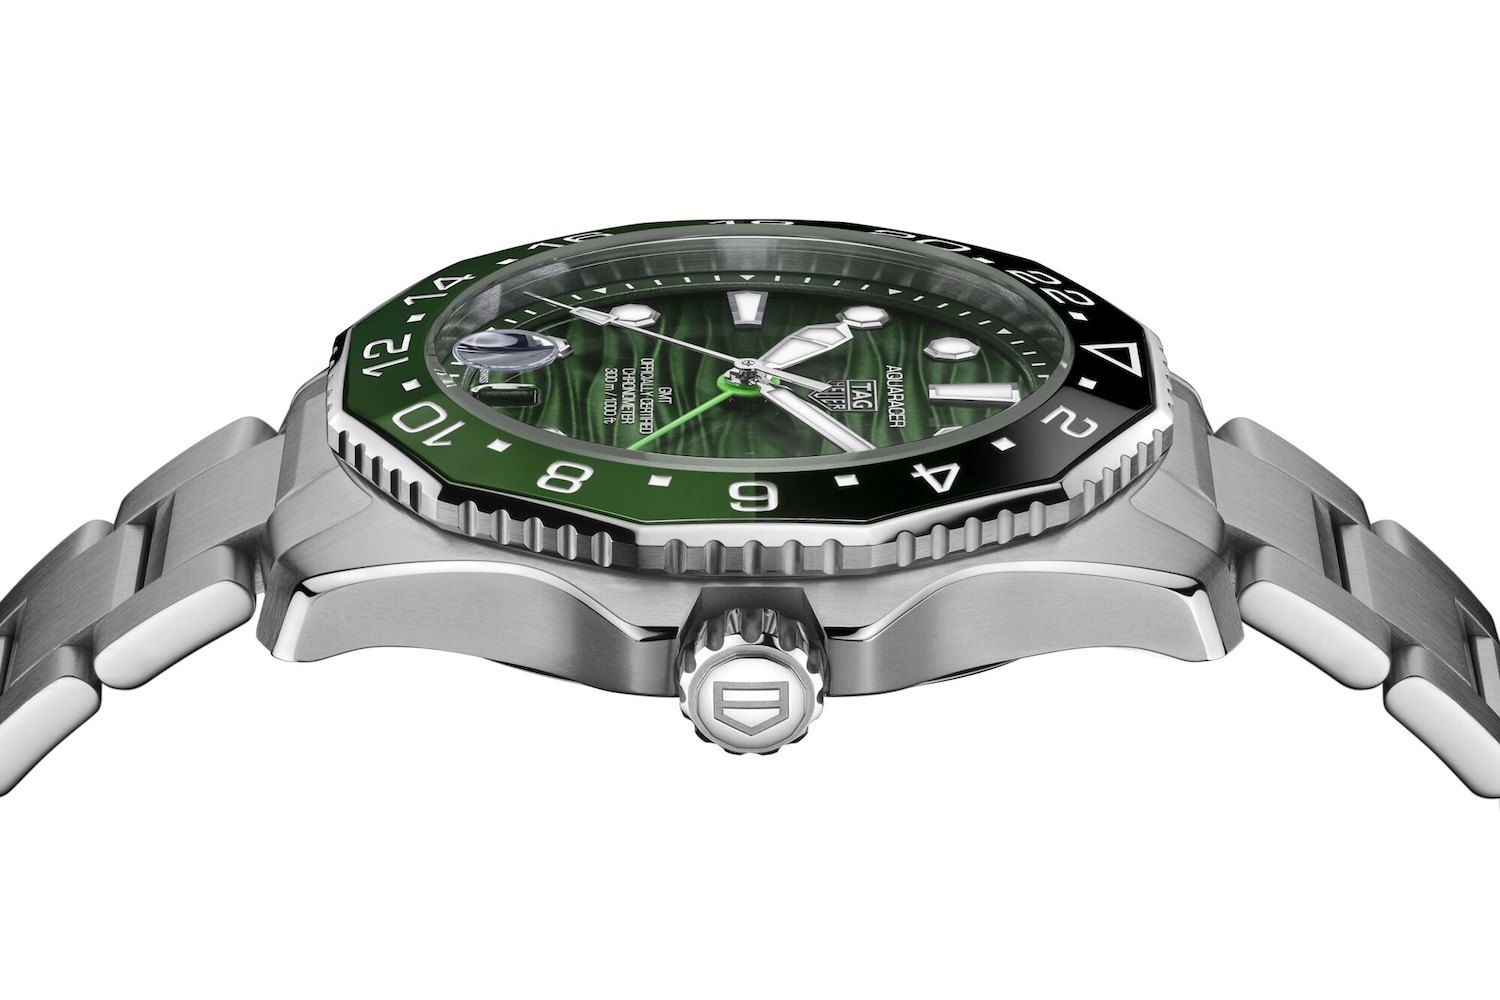 The TAG Heuer Aquaracer Professional 300 in jade. Elevated side view including crown and polished steel case.